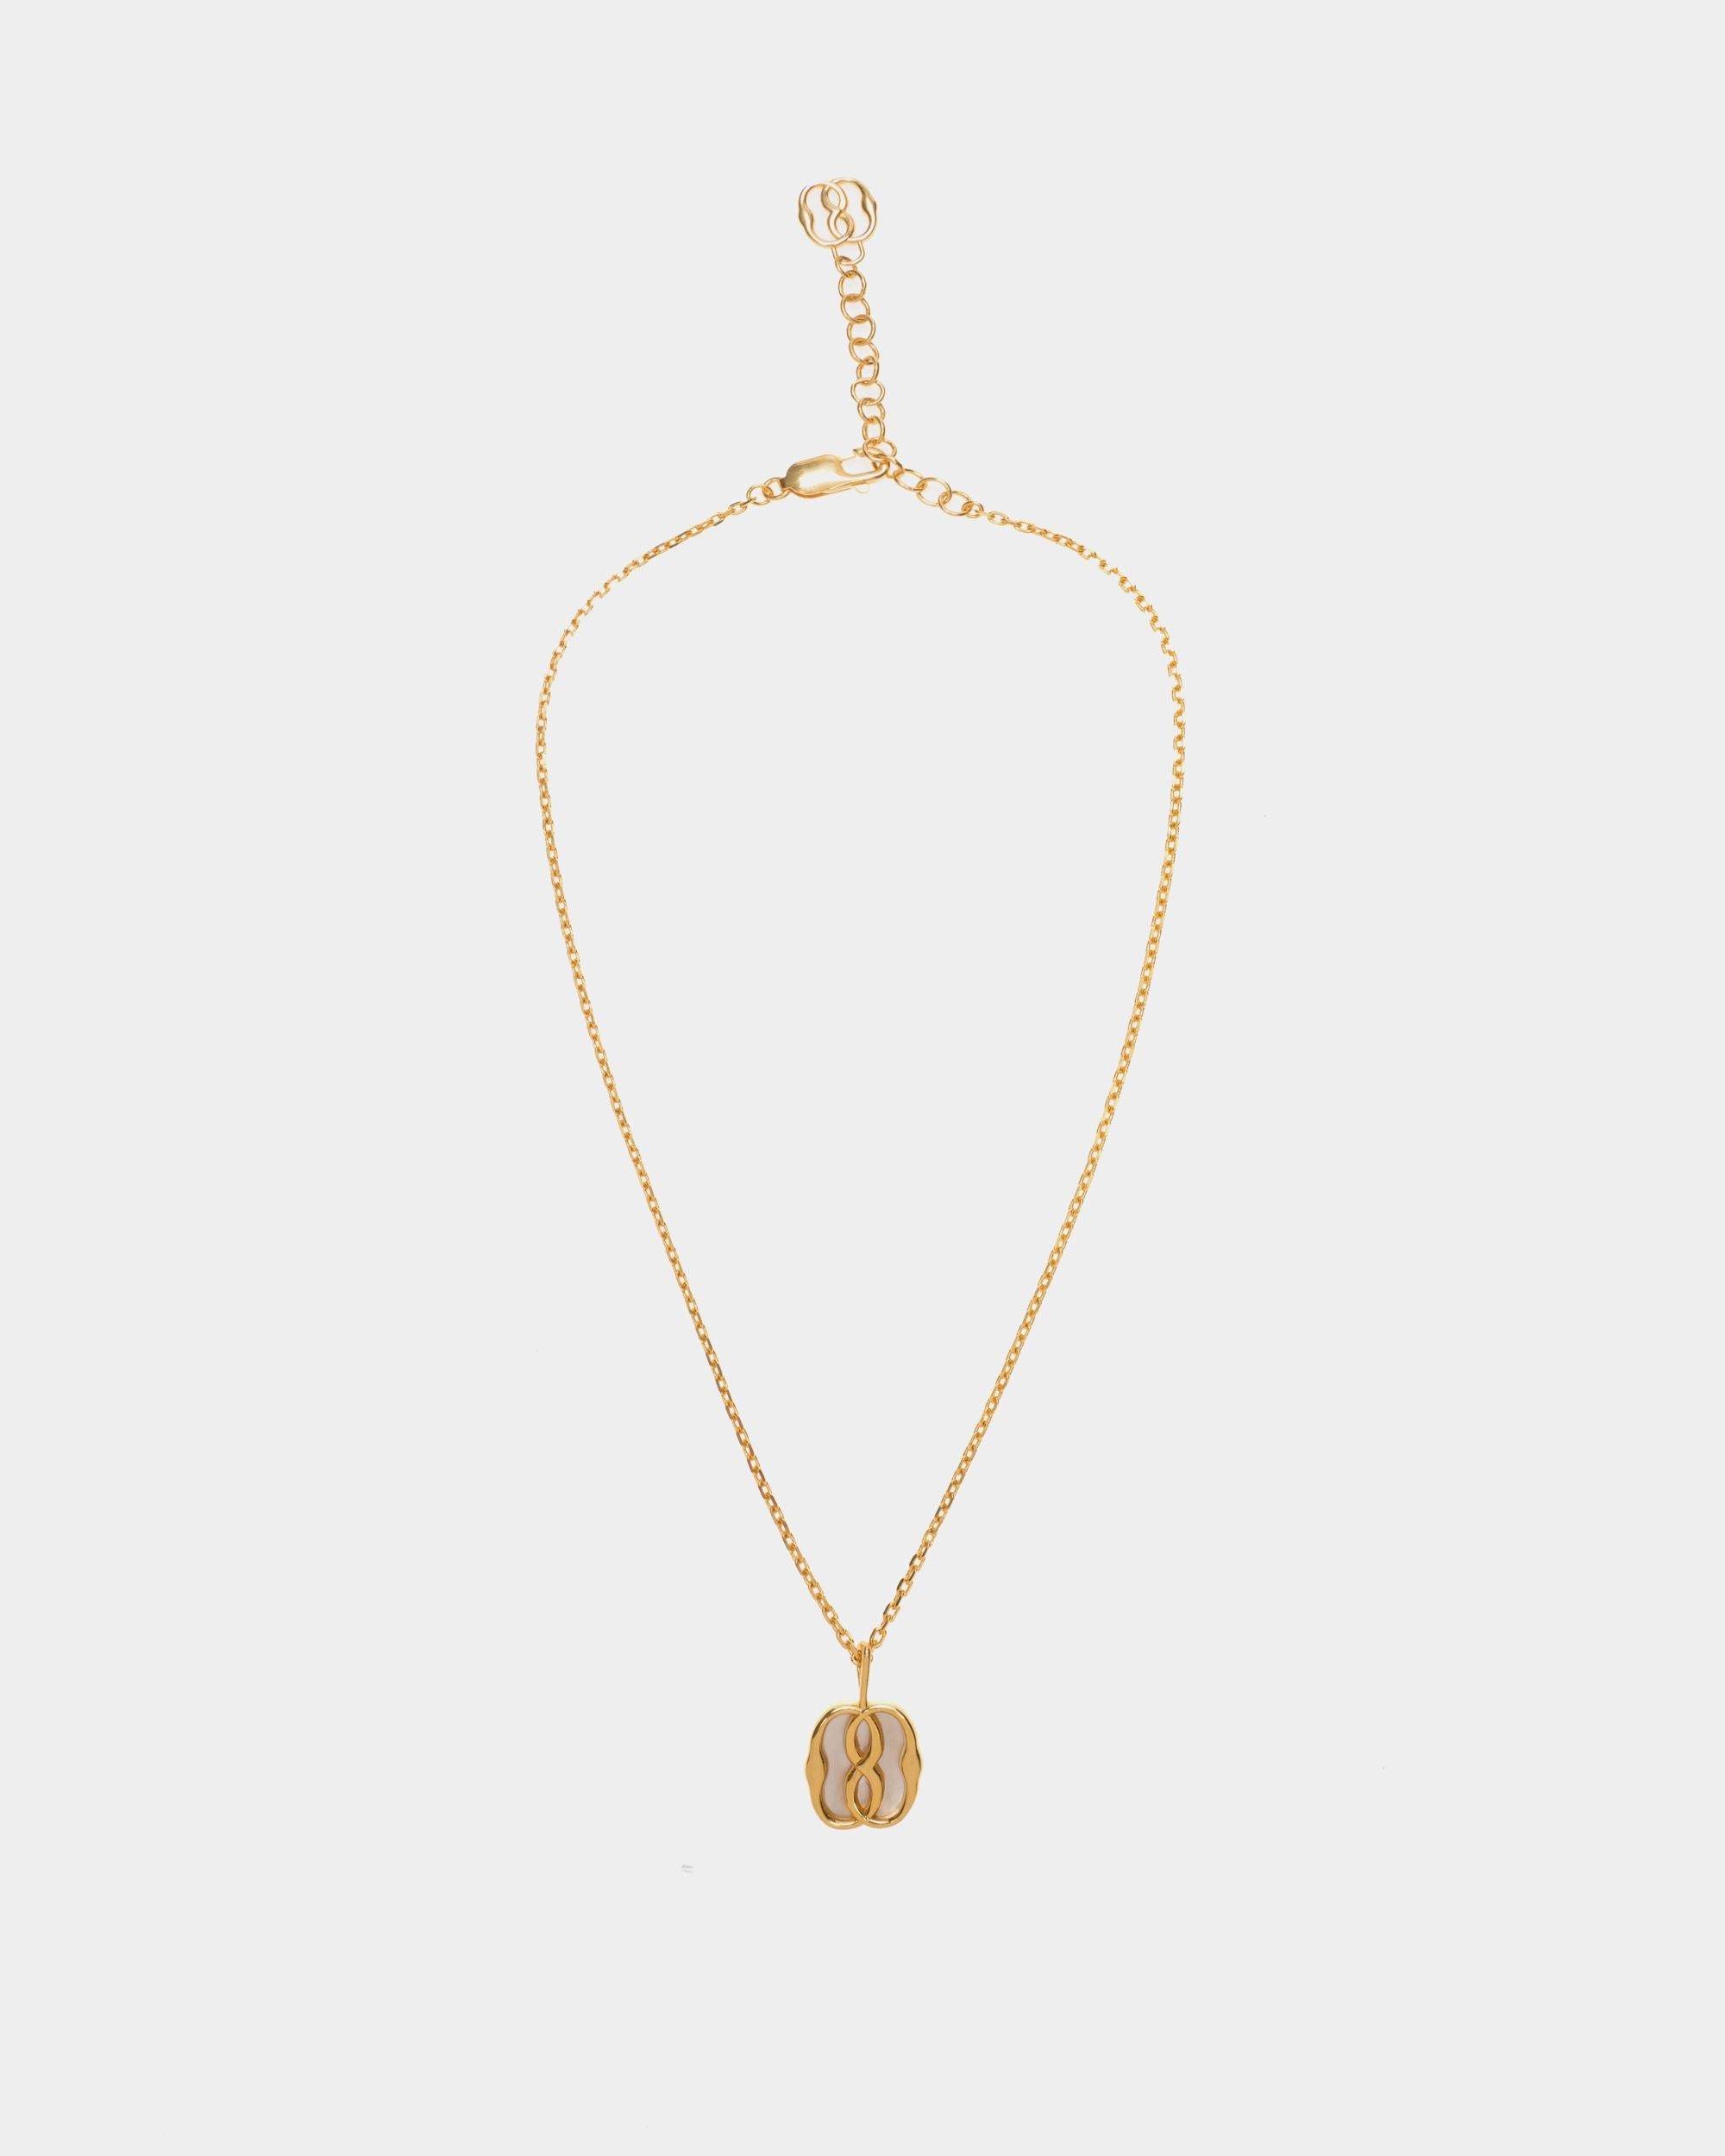 Women's Emblem Necklace in Gold-tone Eco Brass and Mother of Pearl | Bally | Still Life Front